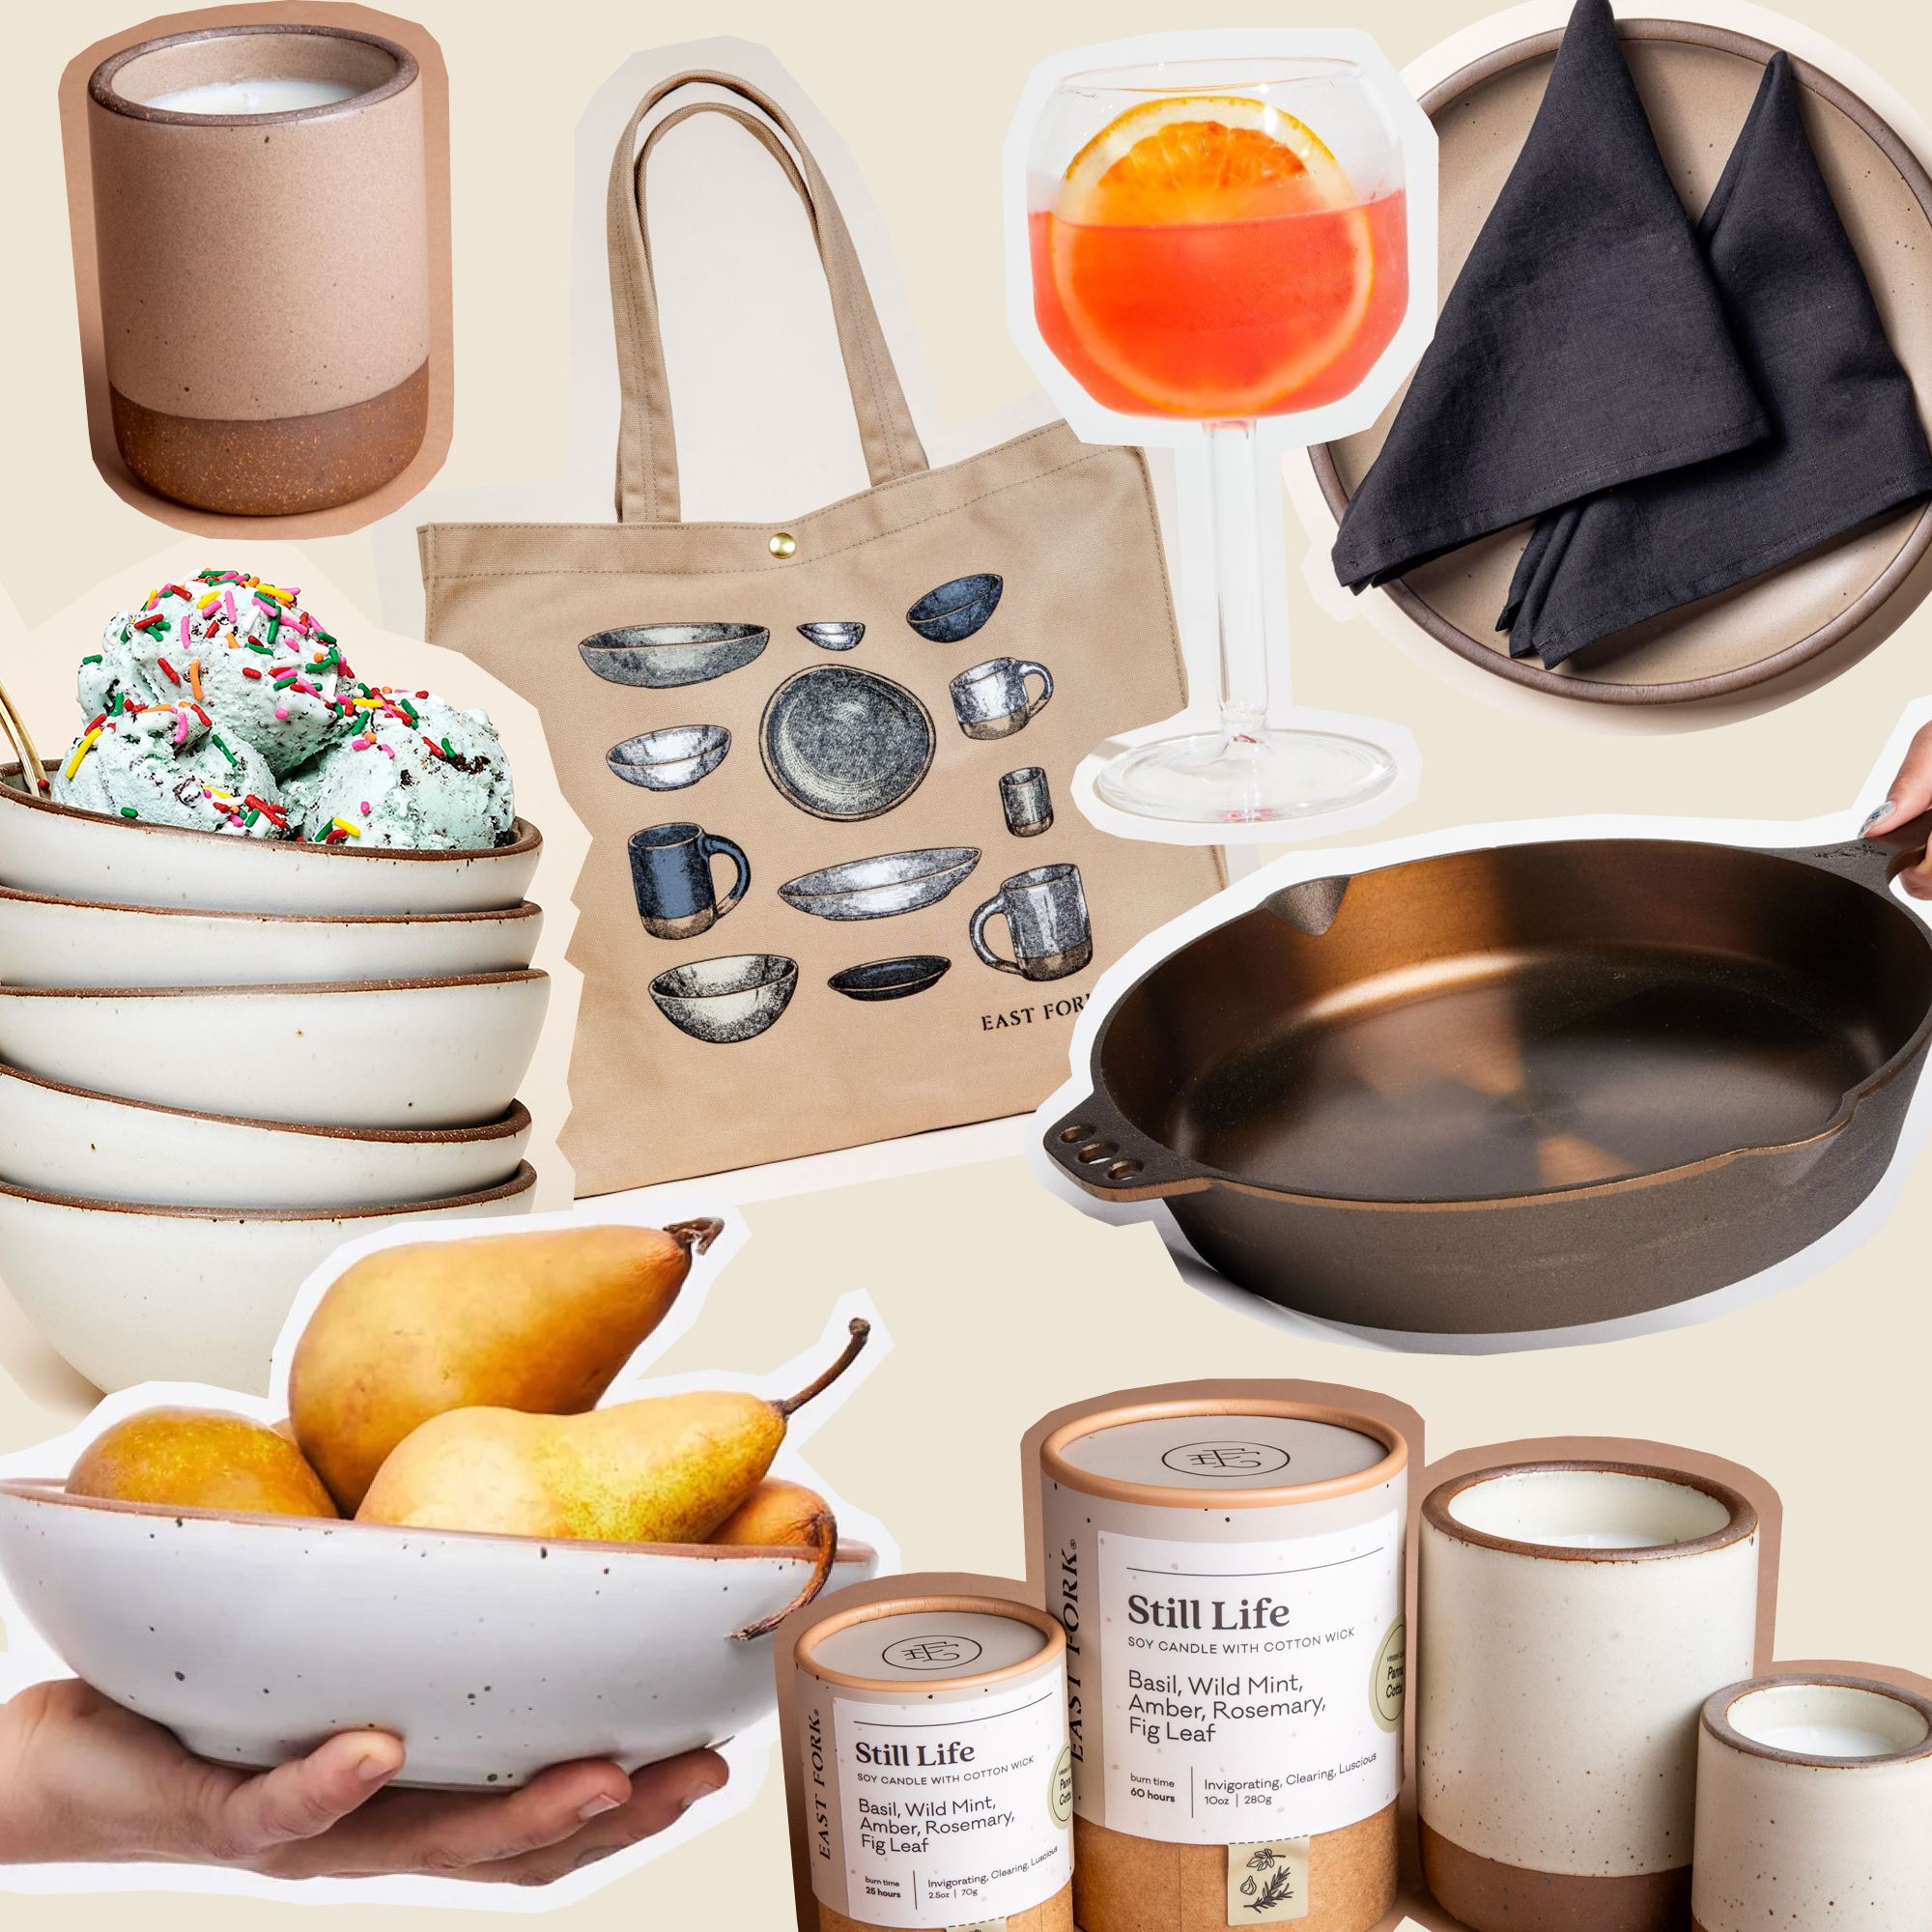 A collage-style photo of different cut out items like candles, a skillet, bowls, napkins, glassware and more.